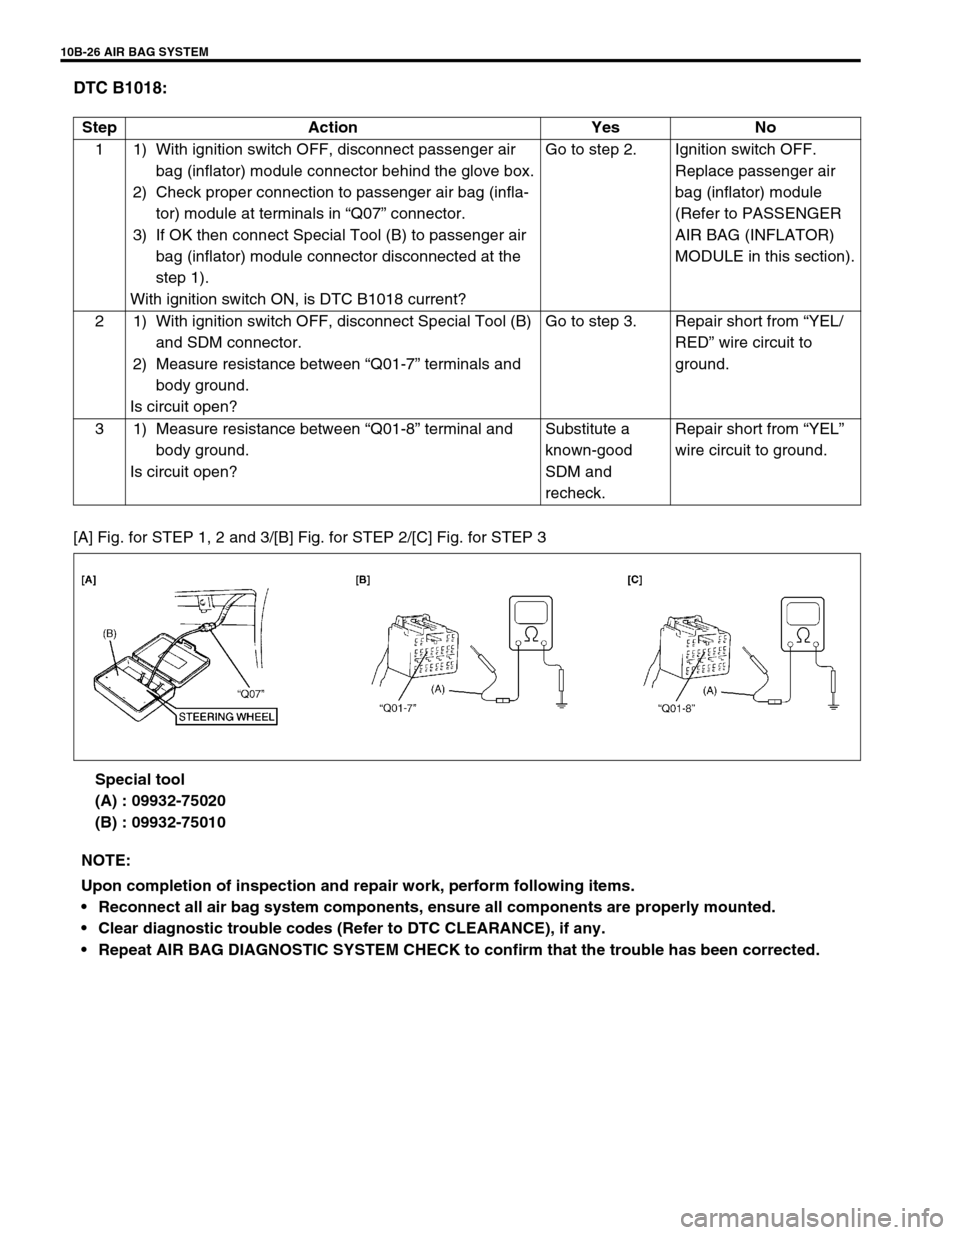 SUZUKI GRAND VITARA 2001 2.G Owners Manual 10B-26 AIR BAG SYSTEM
DTC B1018:
[A] Fig. for STEP 1, 2 and 3/[B] Fig. for STEP 2/[C] Fig. for STEP 3
Special tool
(A) : 09932-75020
(B) : 09932-75010 Step Action Yes No
1 1) With ignition switch OFF,